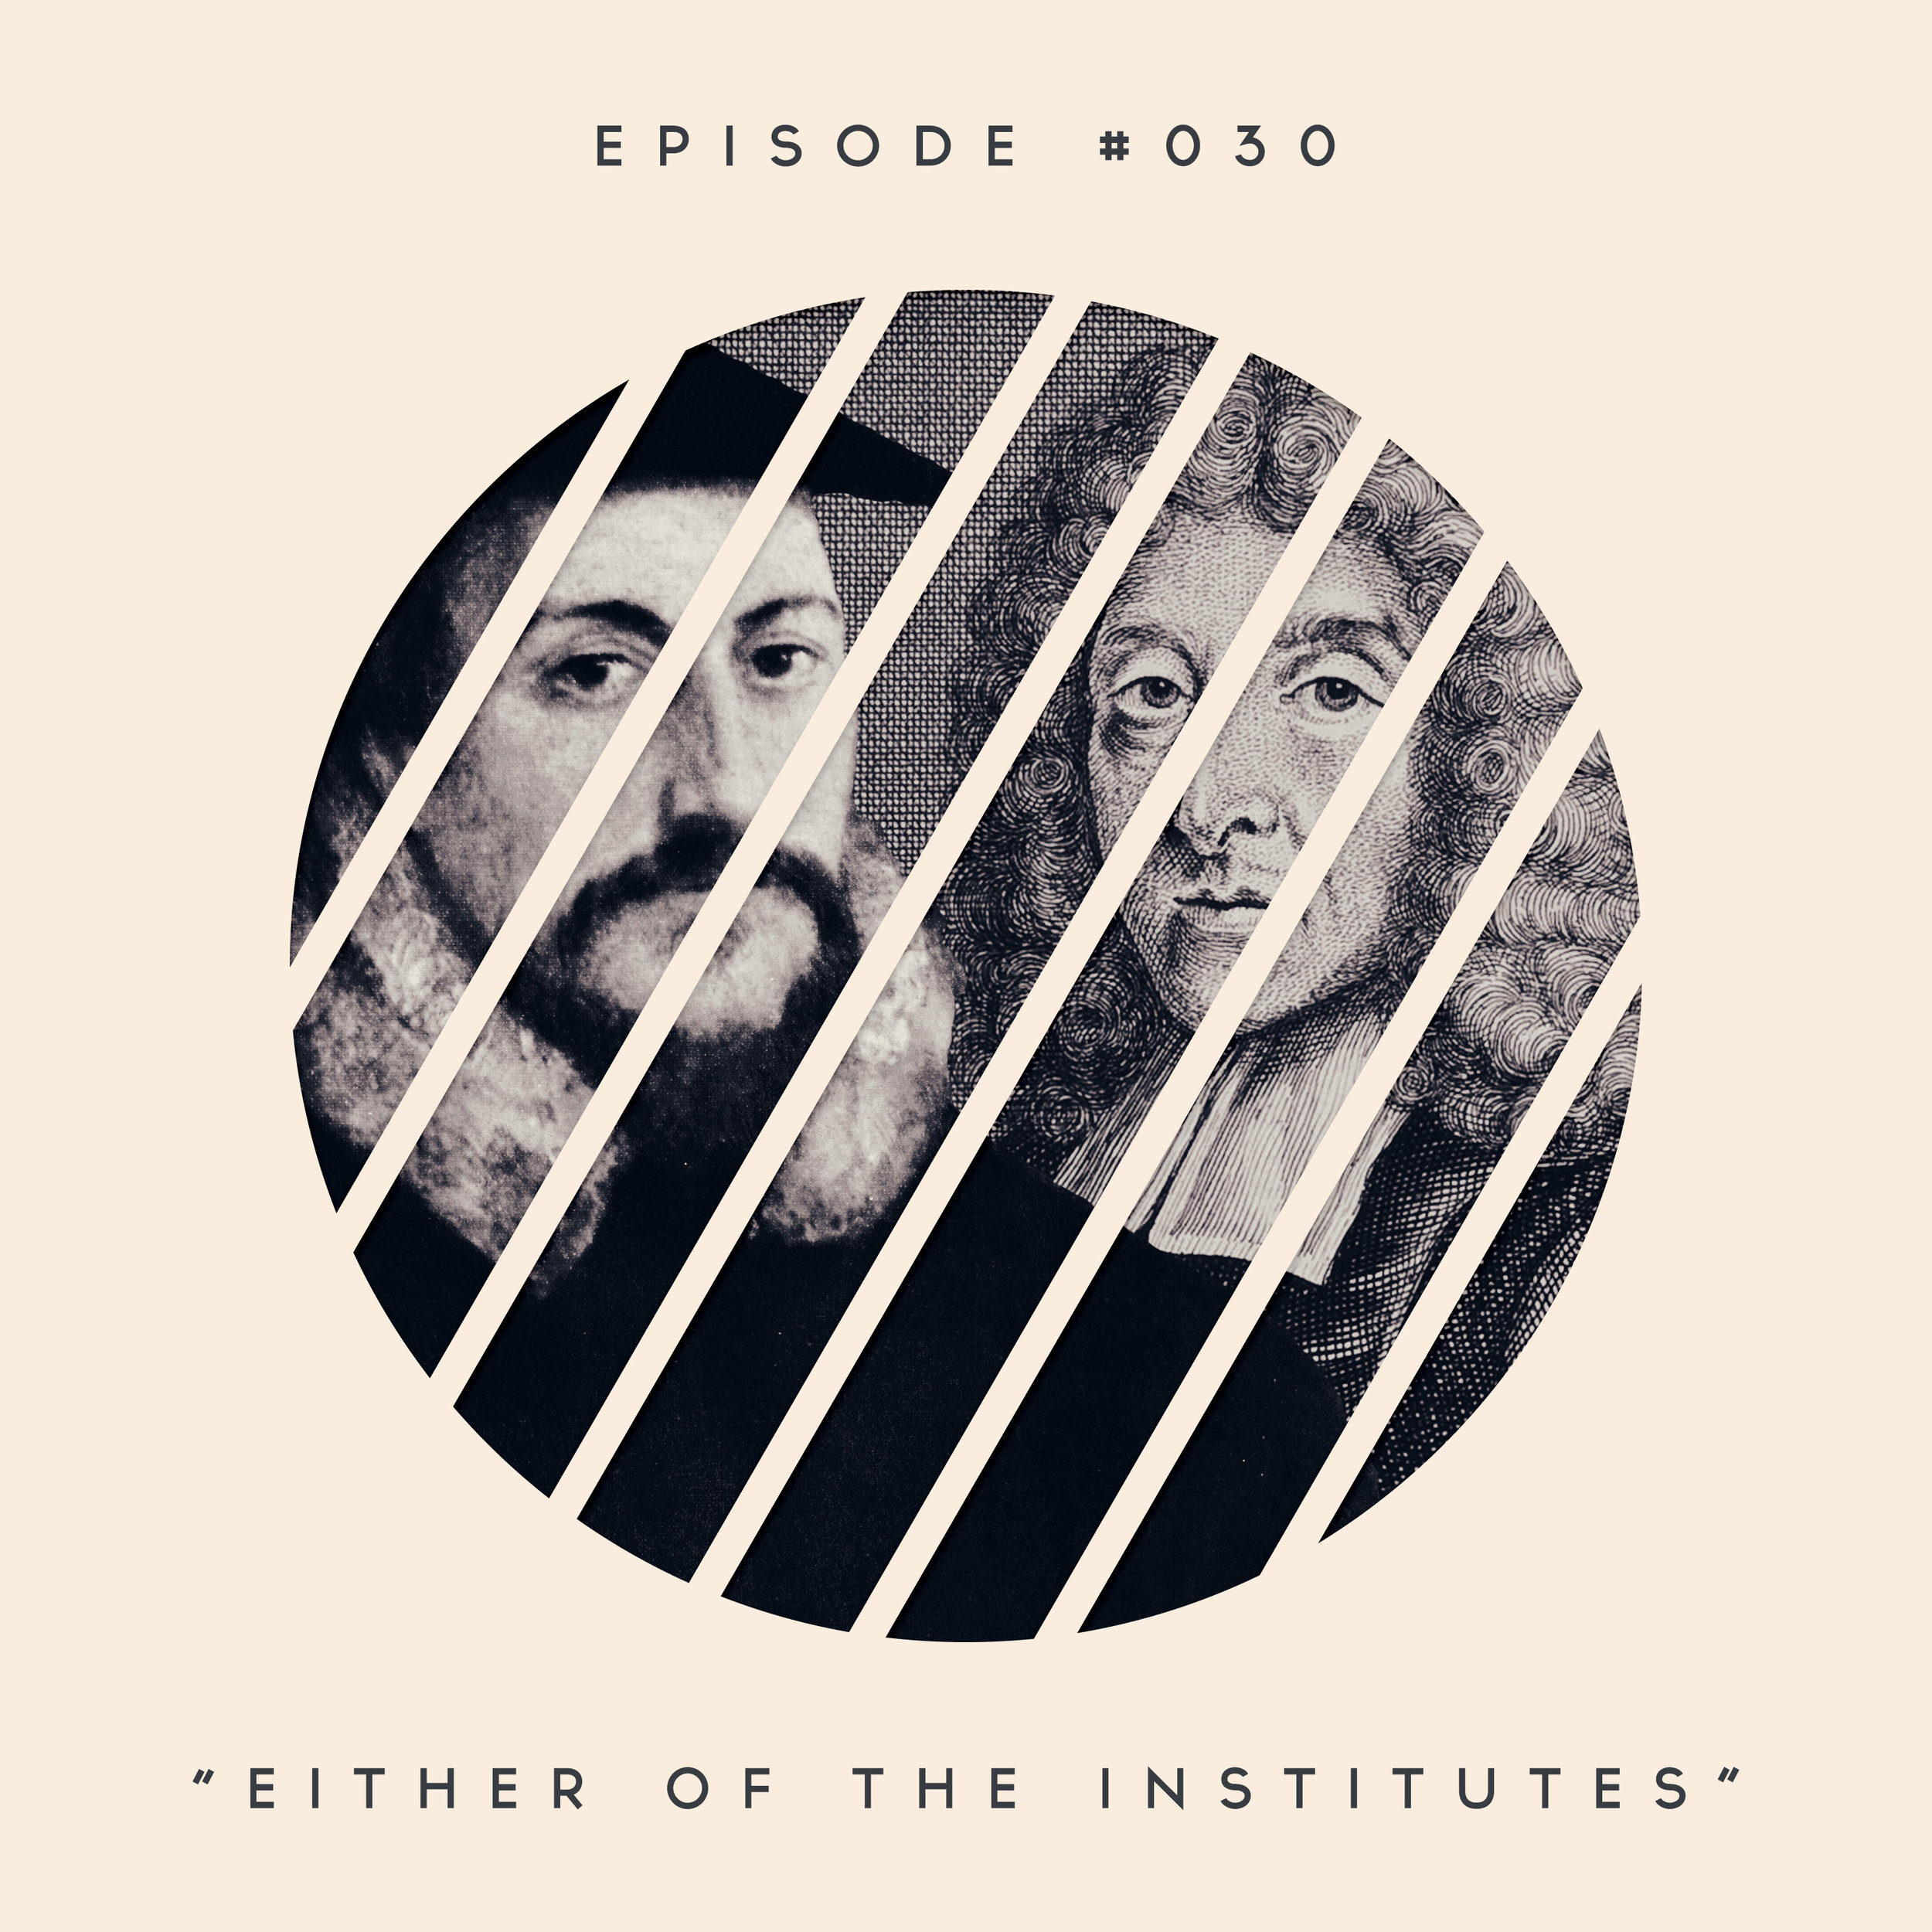 30: Either of the Institutes